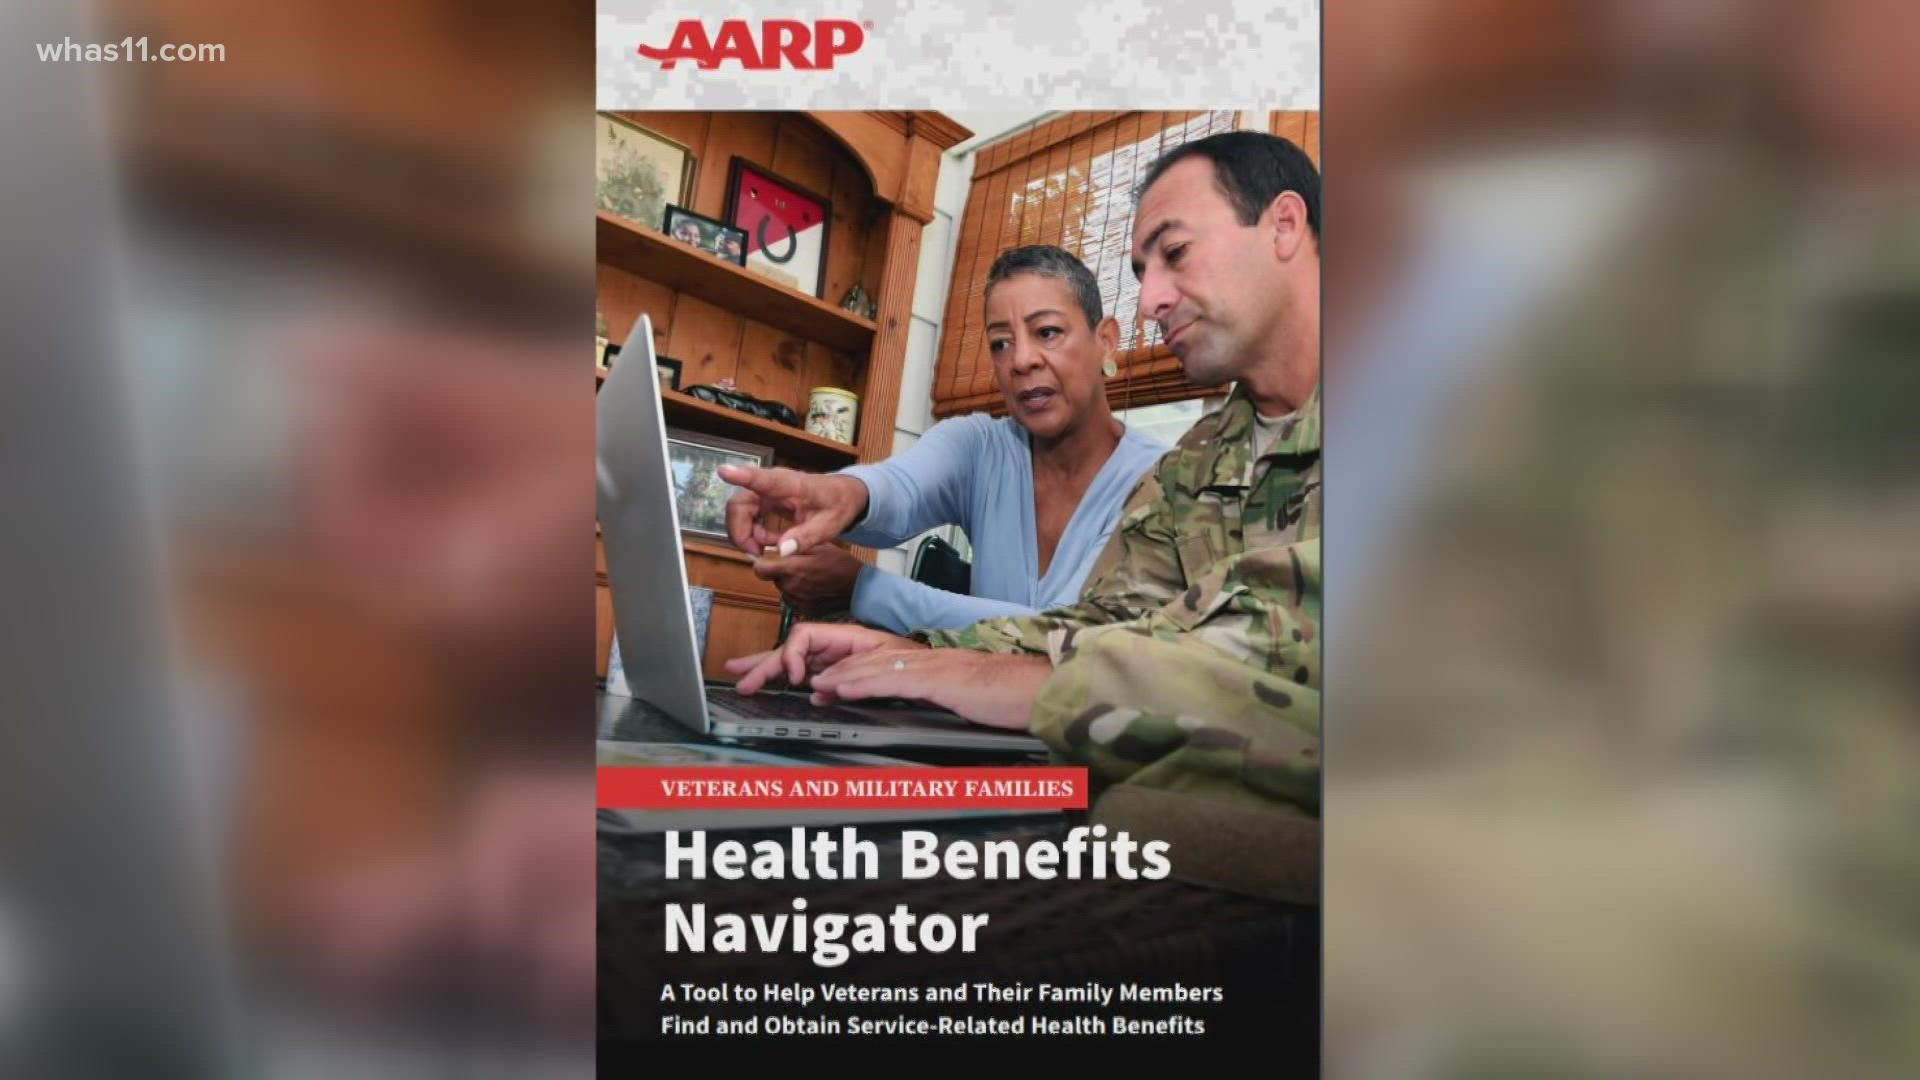 A new tool from AARP can help veterans figure out which benefits they may qualify for and how to access them.